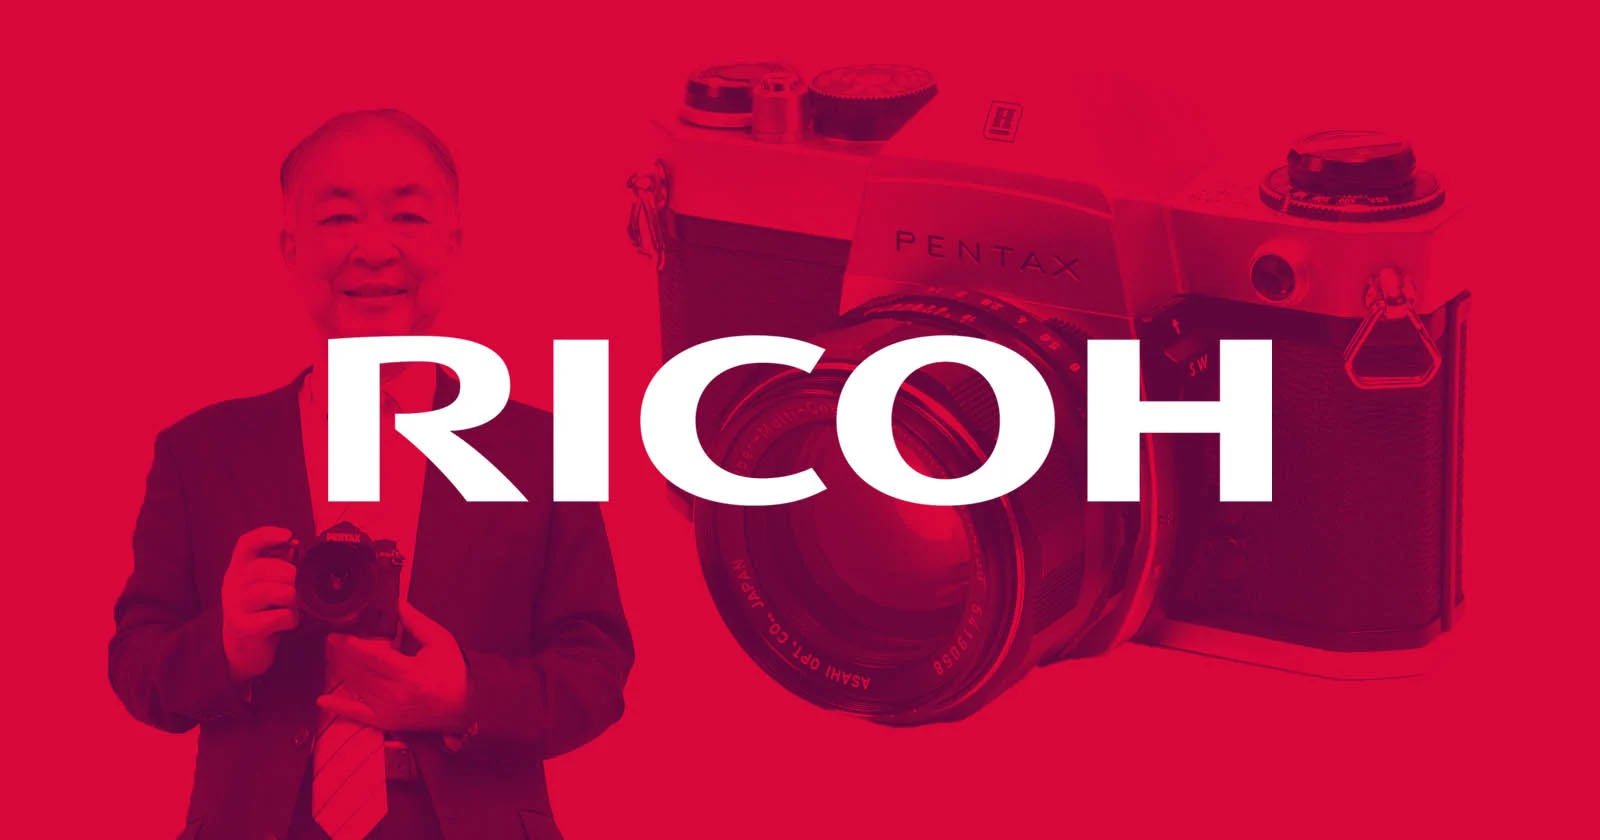 Ricoh Pentax event in Taiwan